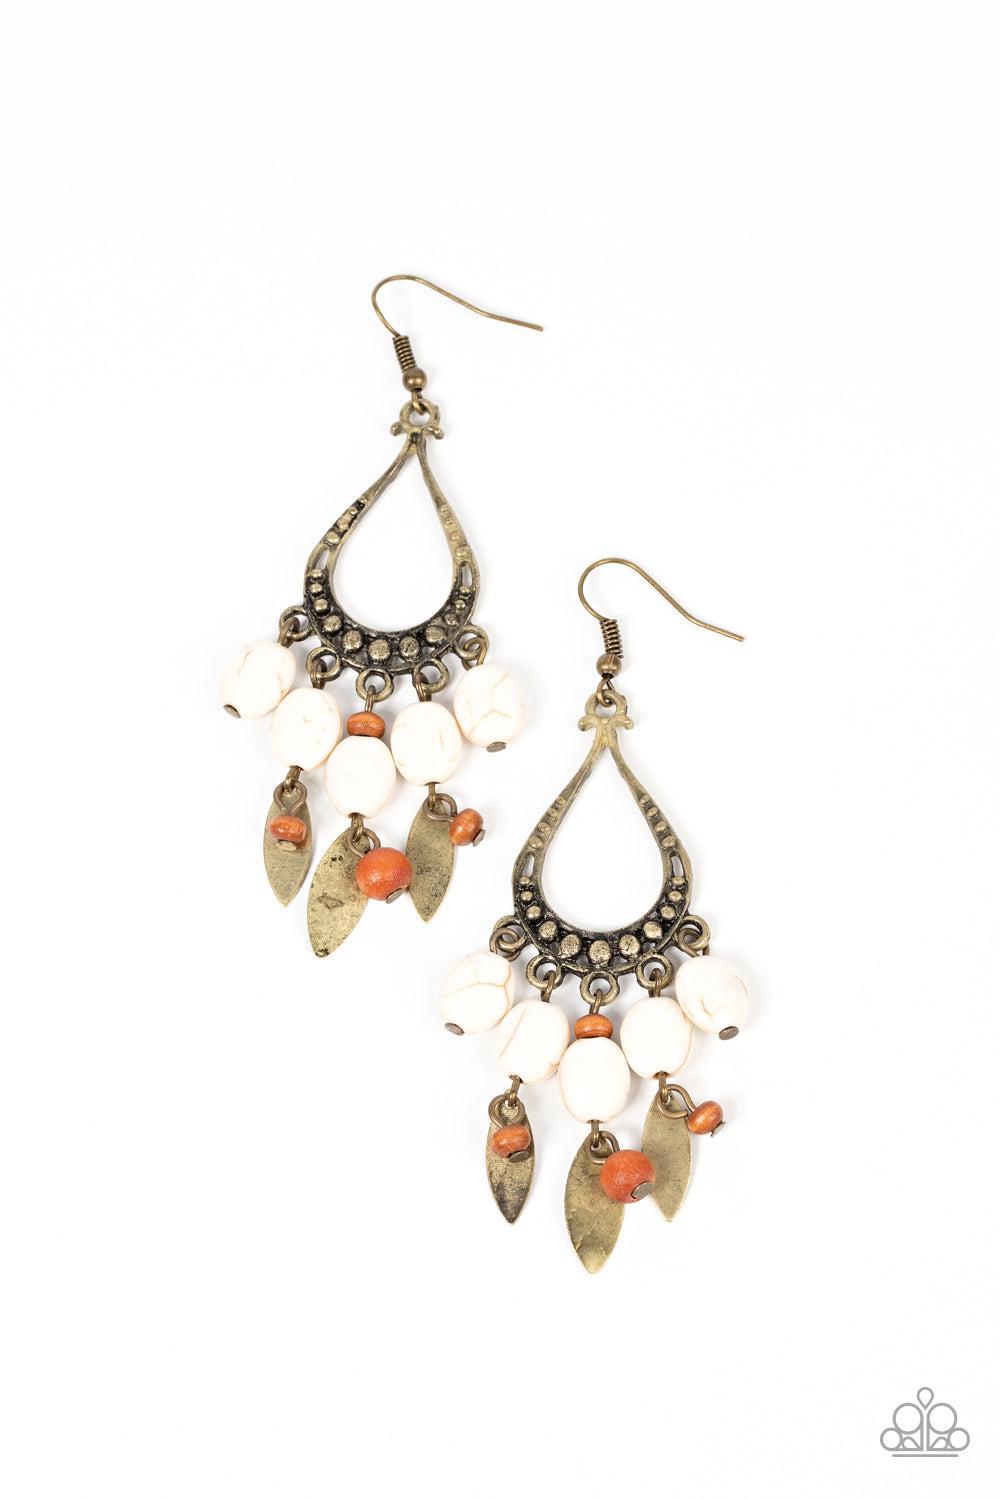 Adobe Air Brass & White Stone Earrings - Paparazzi Accessories- lightbox - CarasShop.com - $5 Jewelry by Cara Jewels